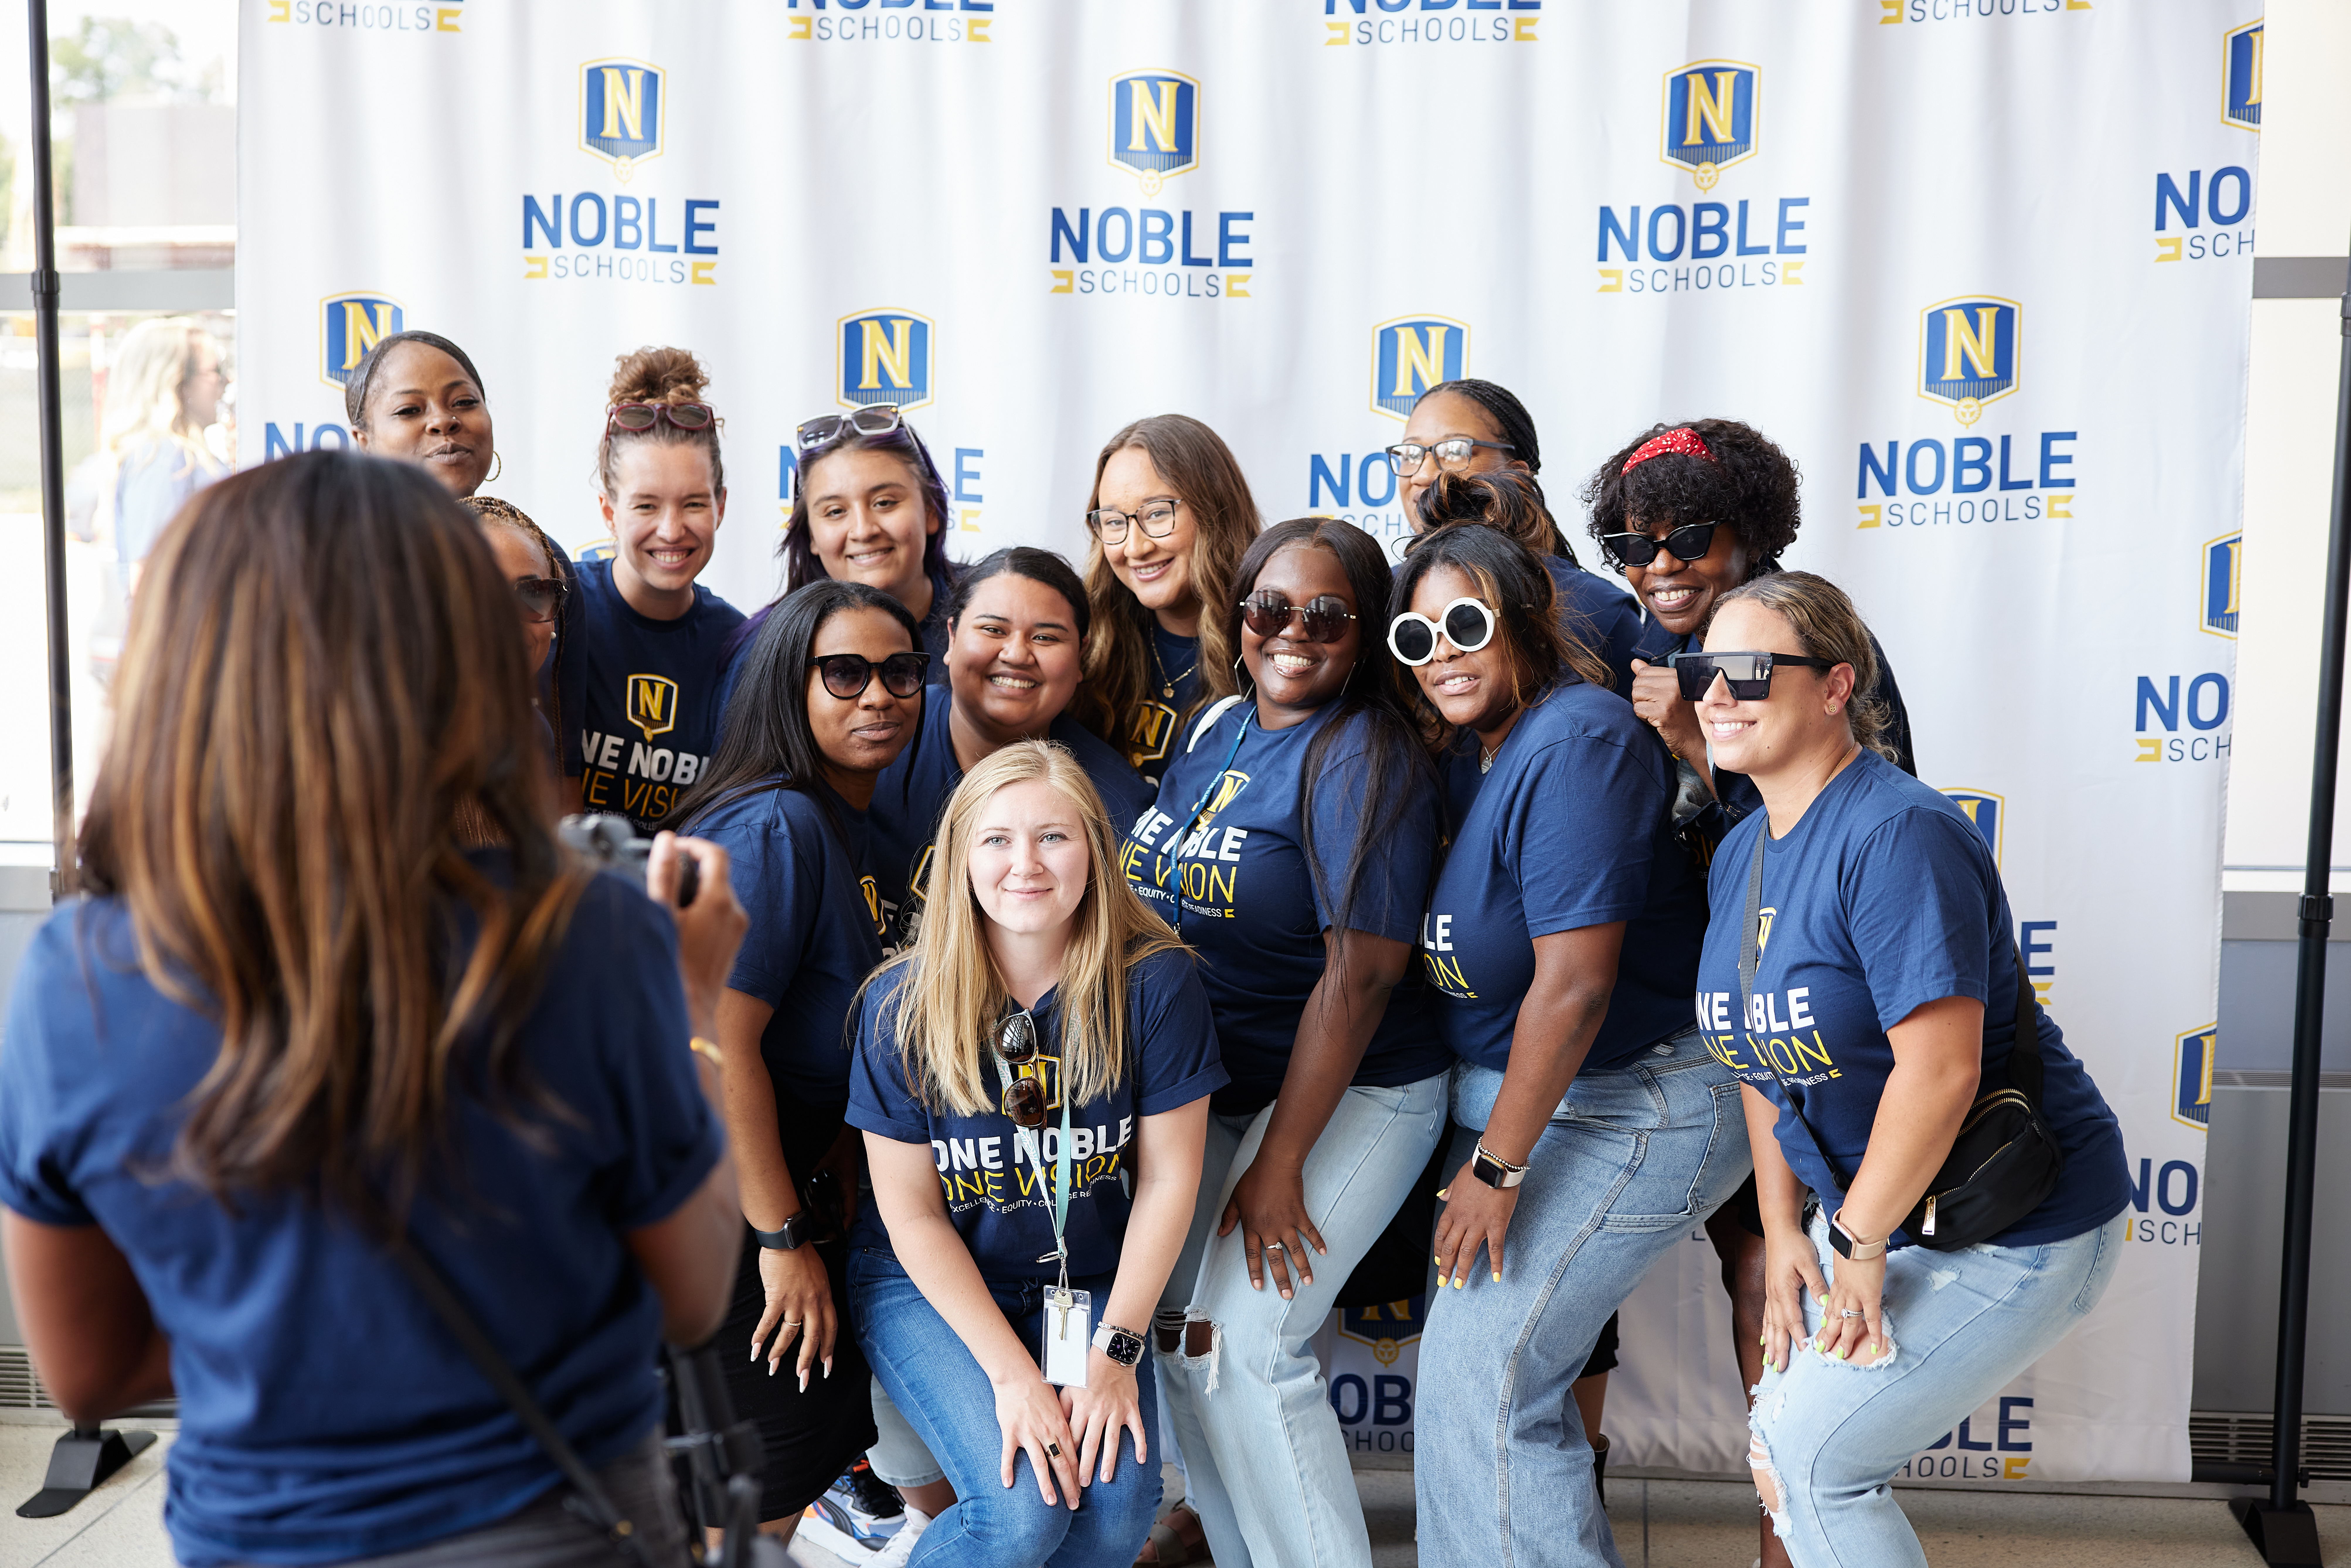 Photo shows a group of Noble Schools' staff members posing in front of a backdrop with the Noble Schools'